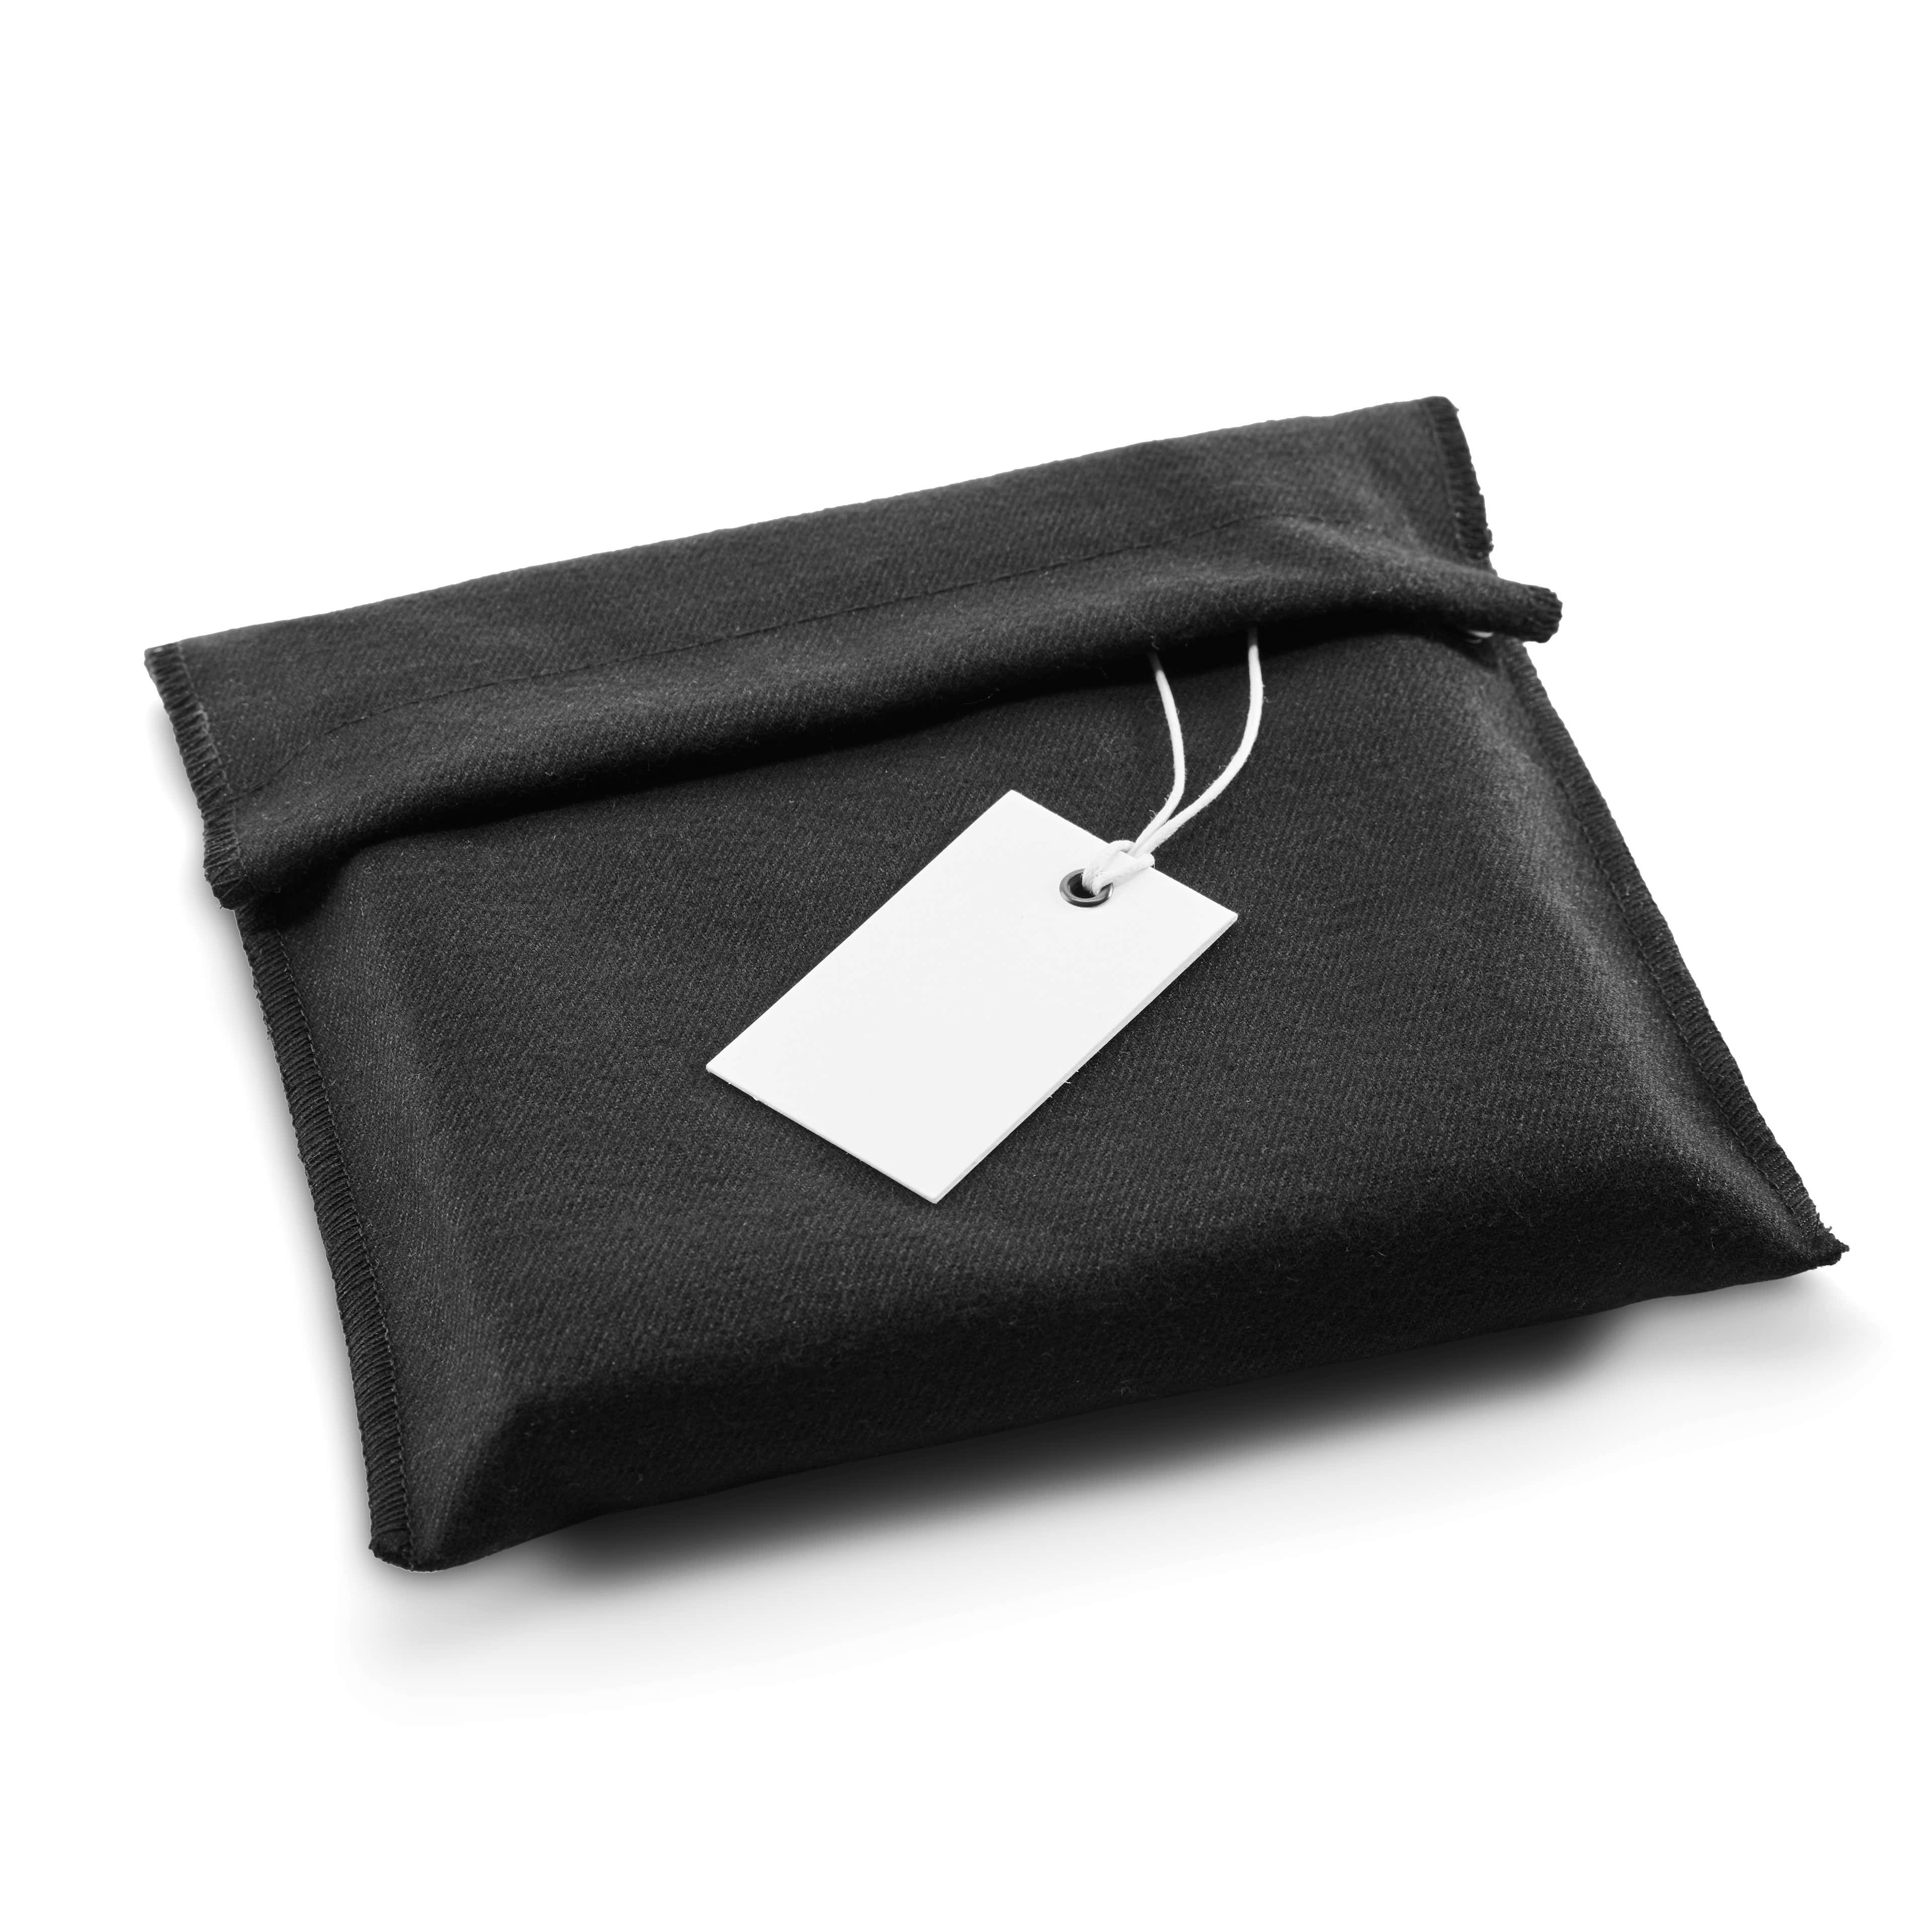 Gift-Ready Packaging - 2 - hover gallery